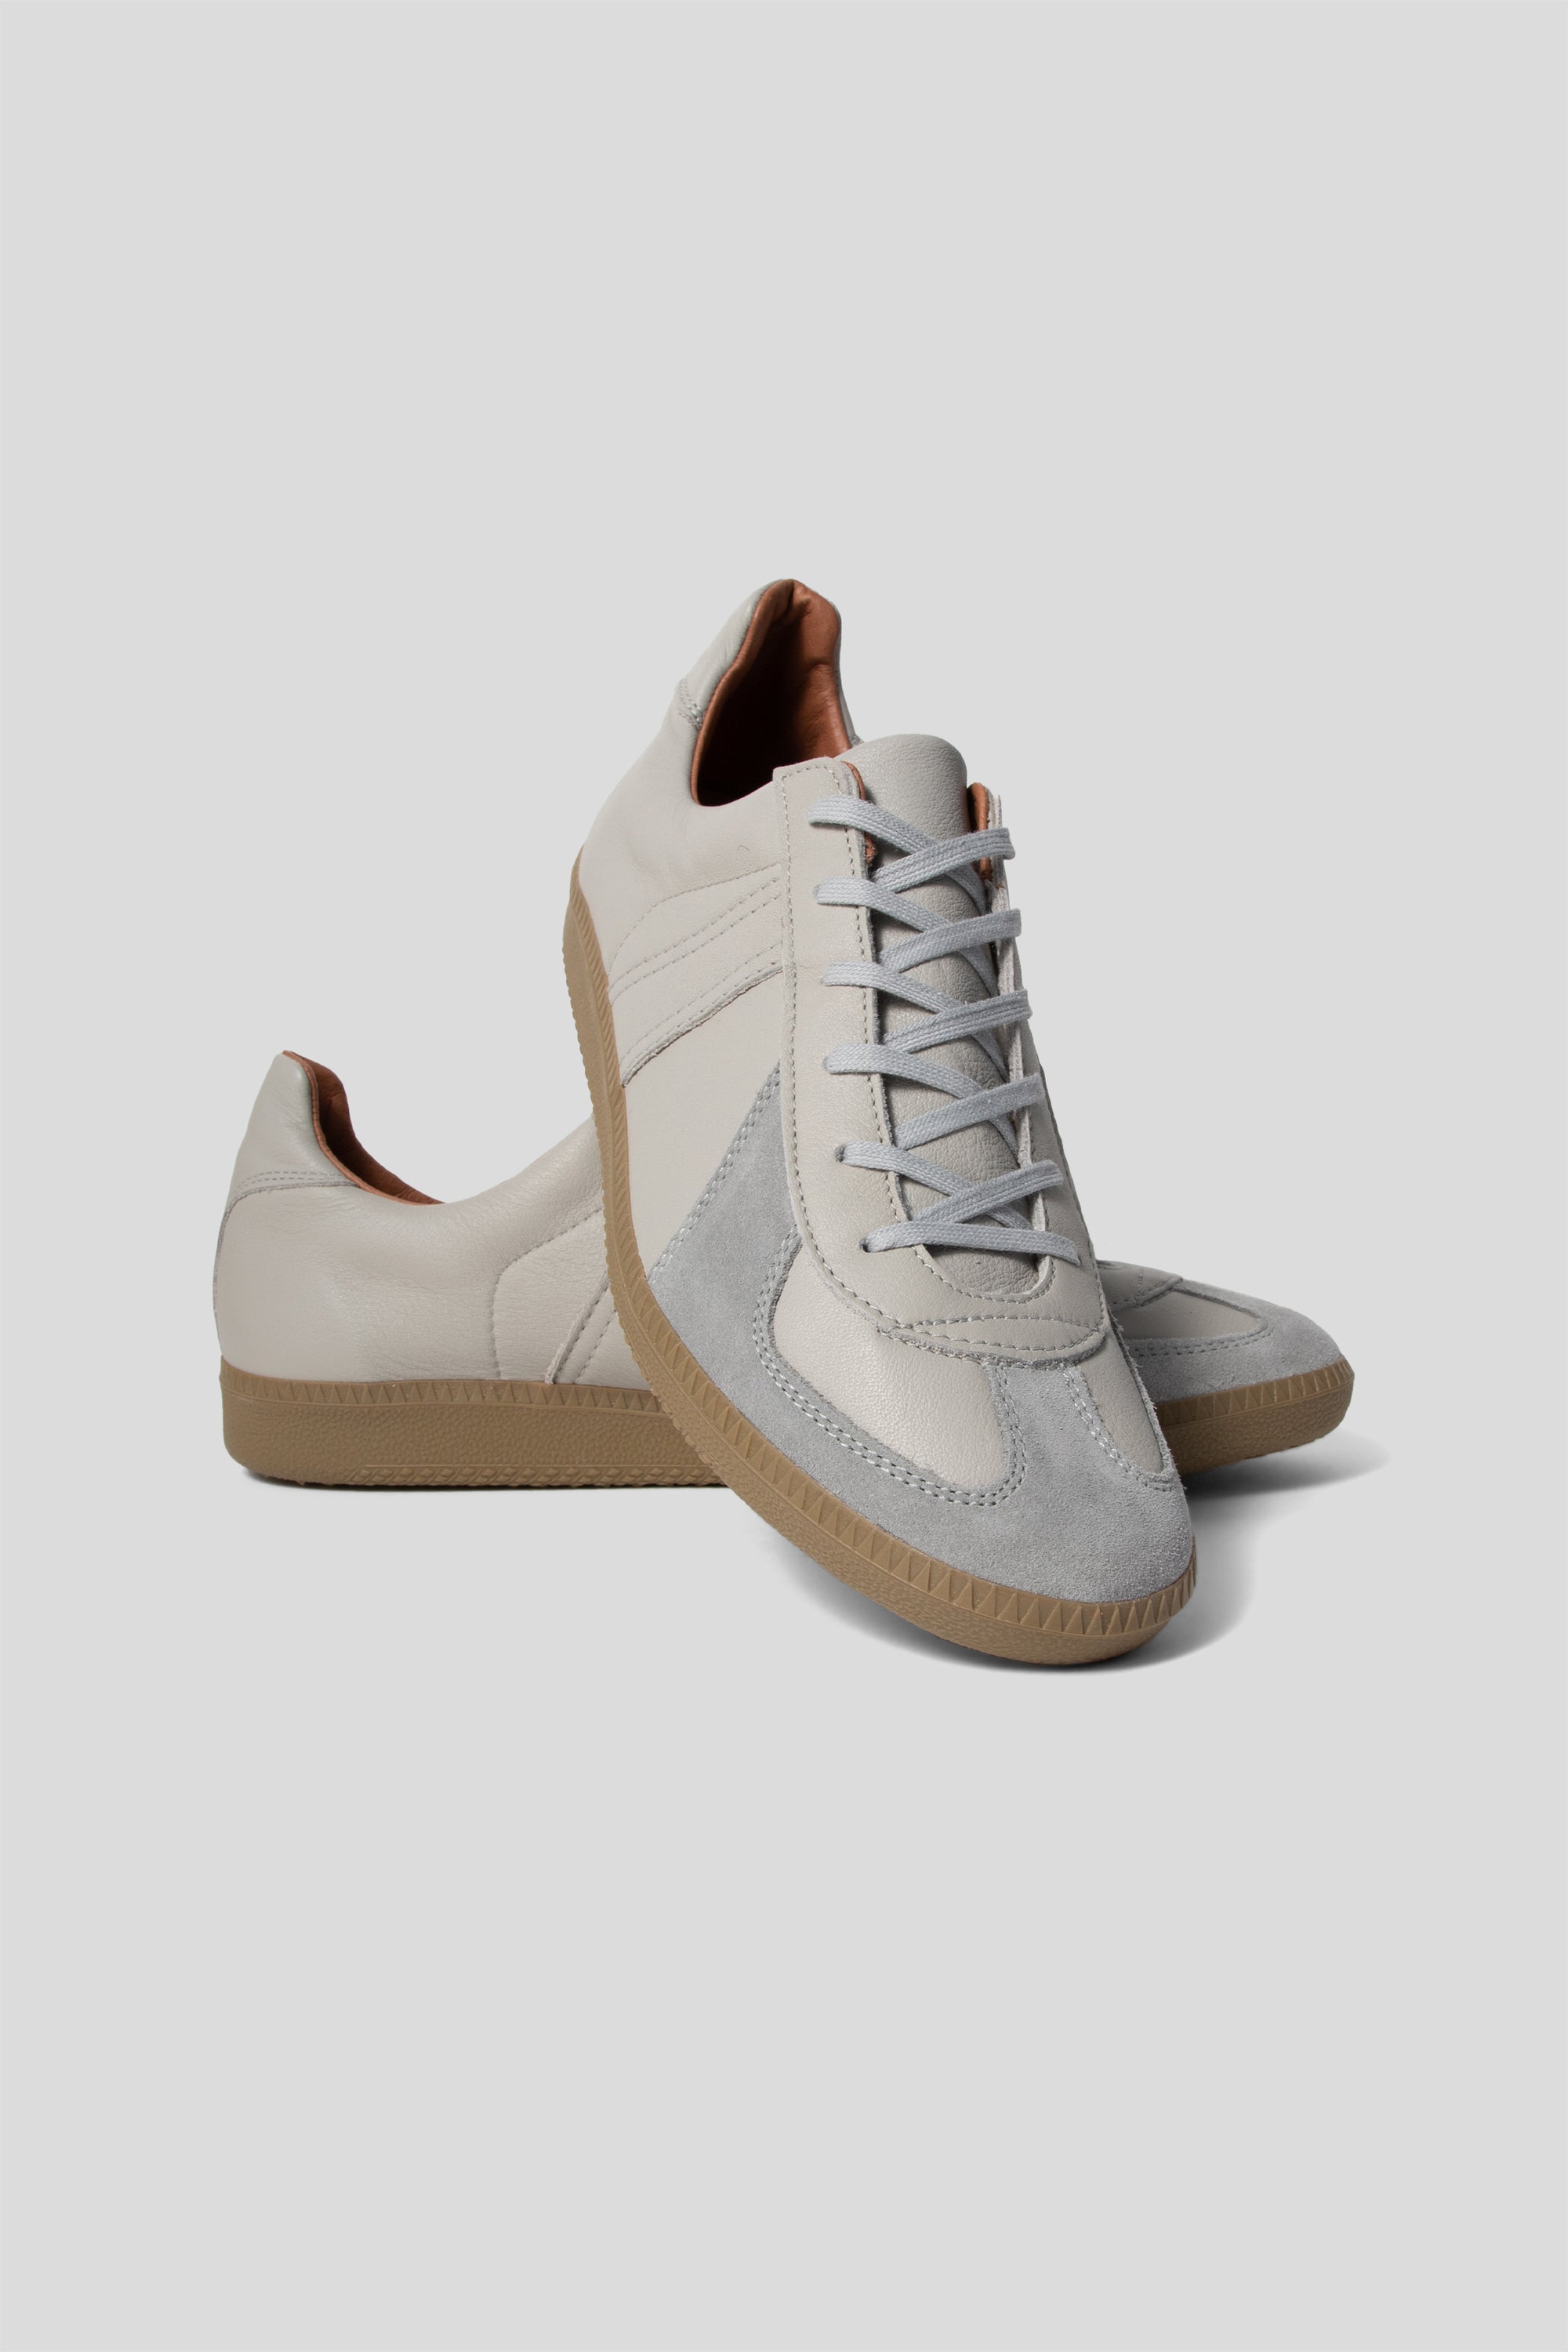 Reproduction of Found German Military Trainer Shoe in Light Gray